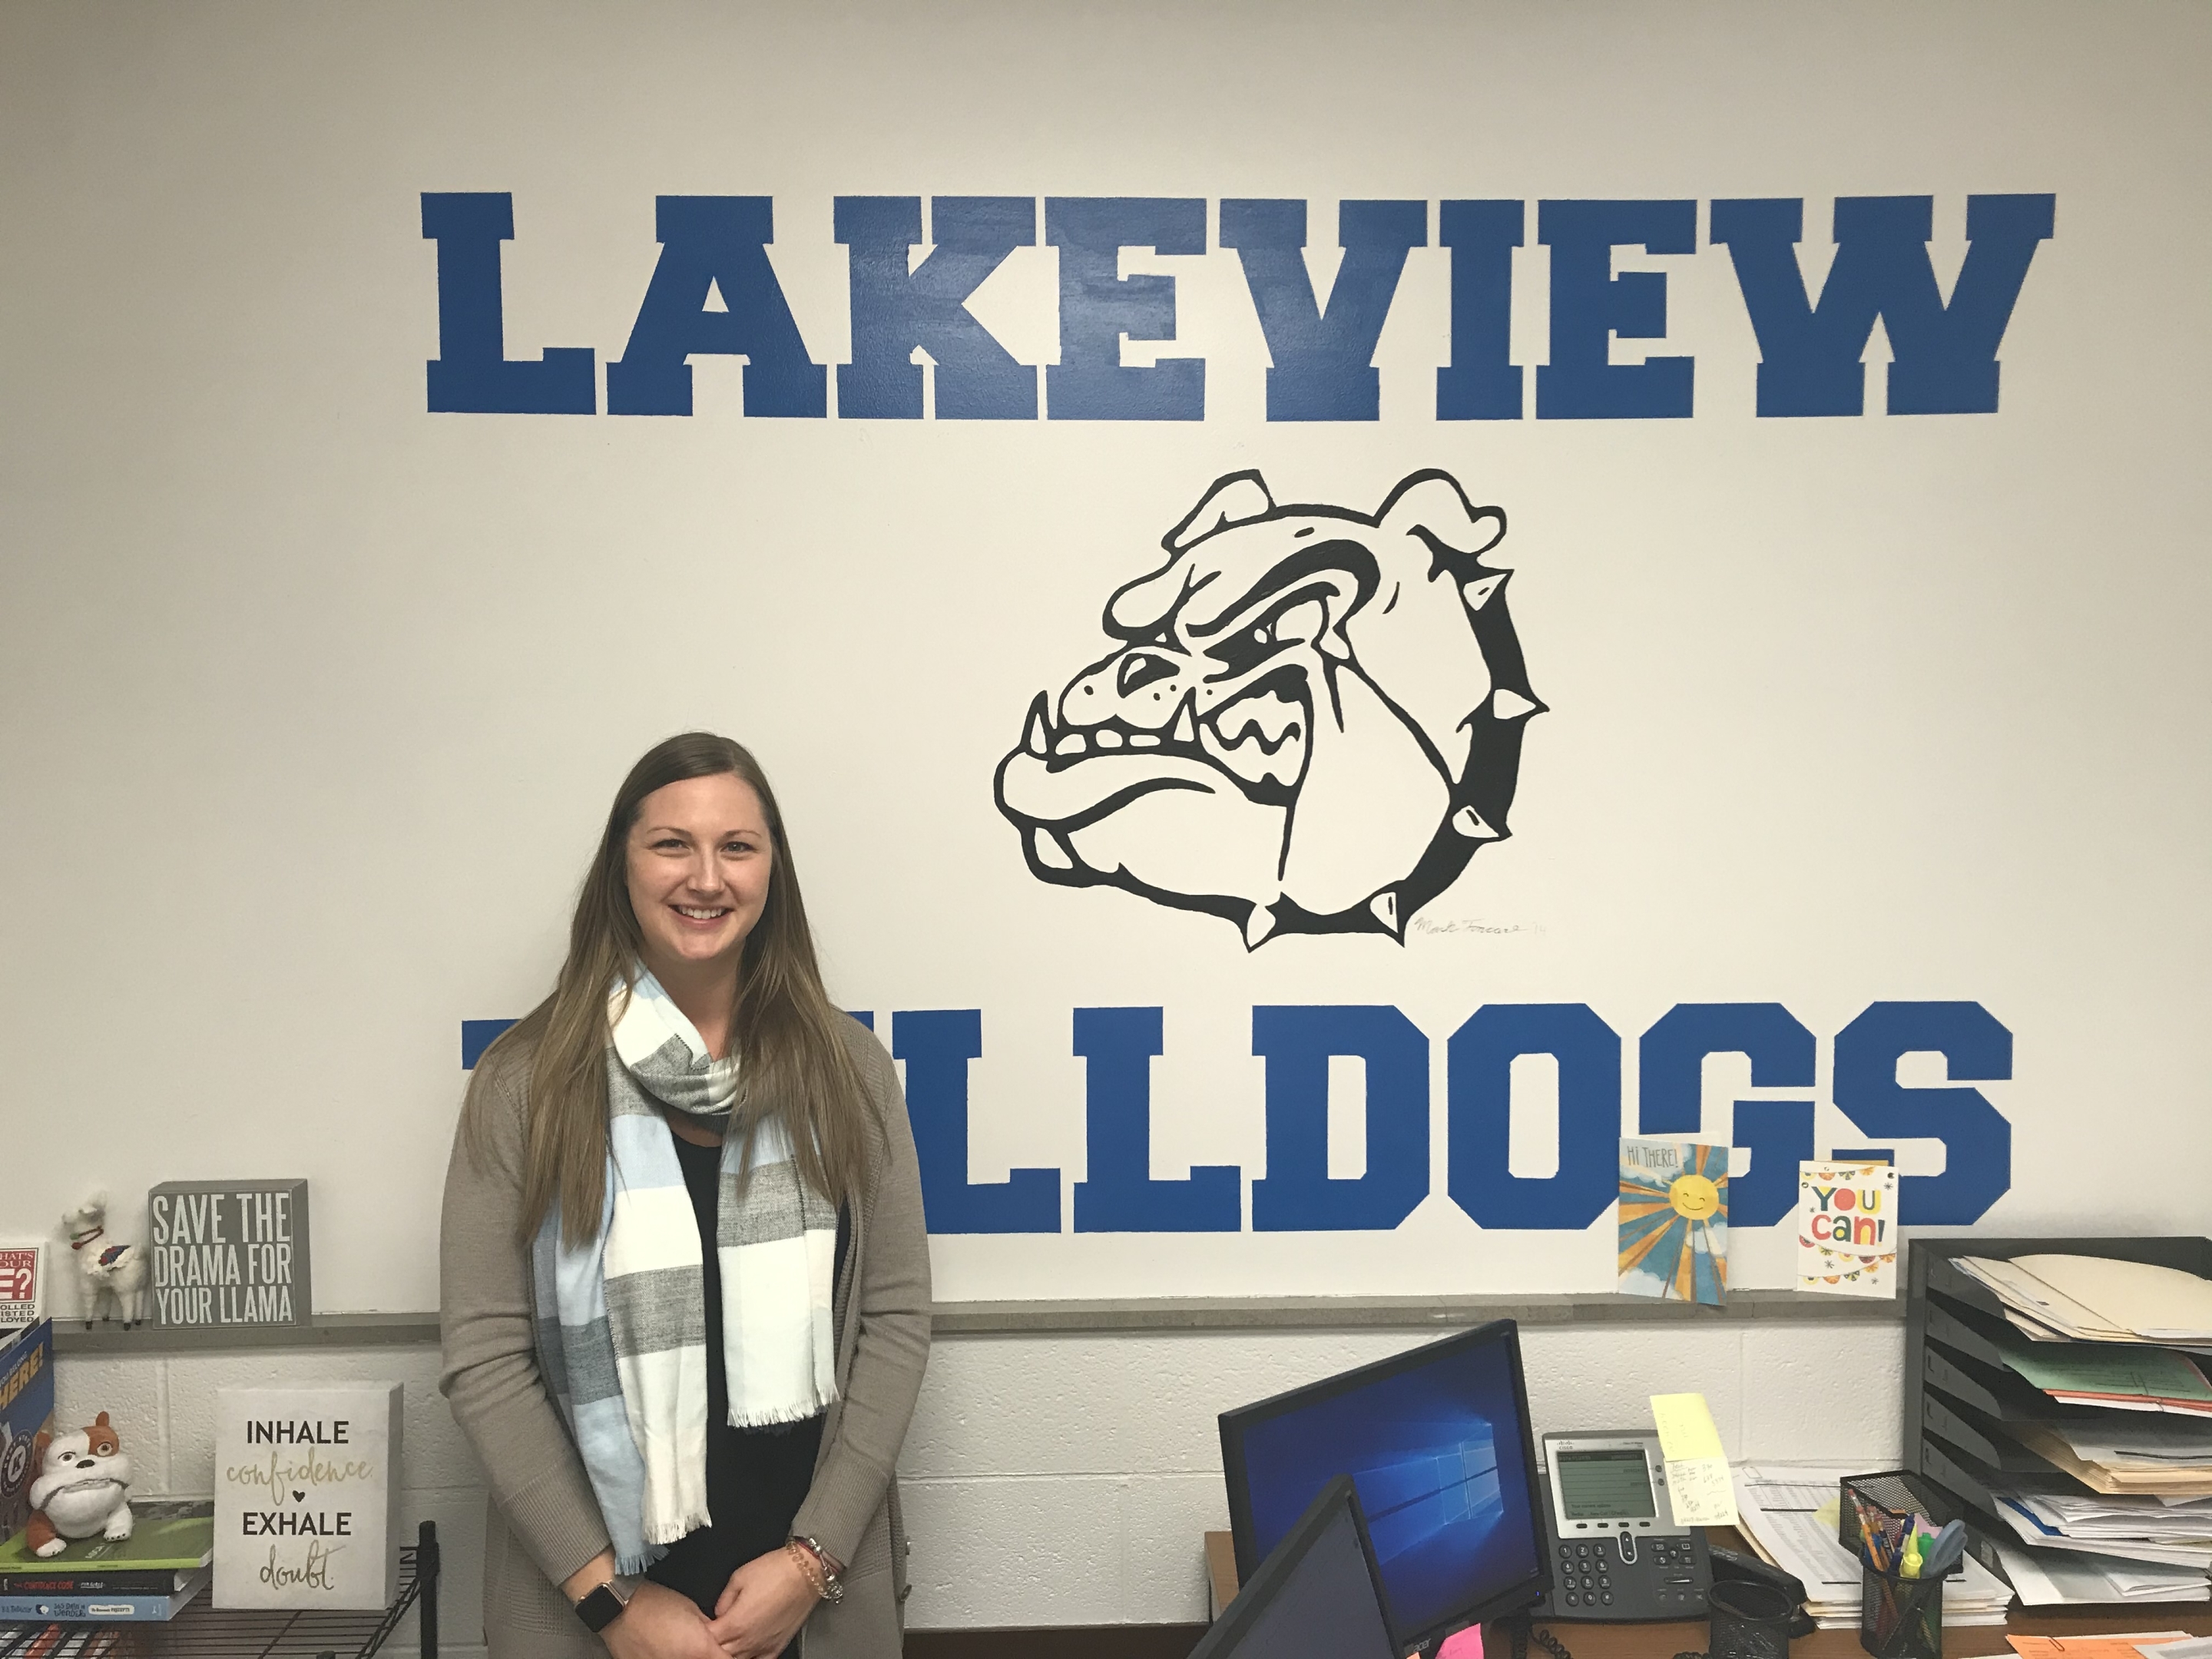 Lakeview High School Coordinator smiling in front of a Lakeview Bulldogs mural